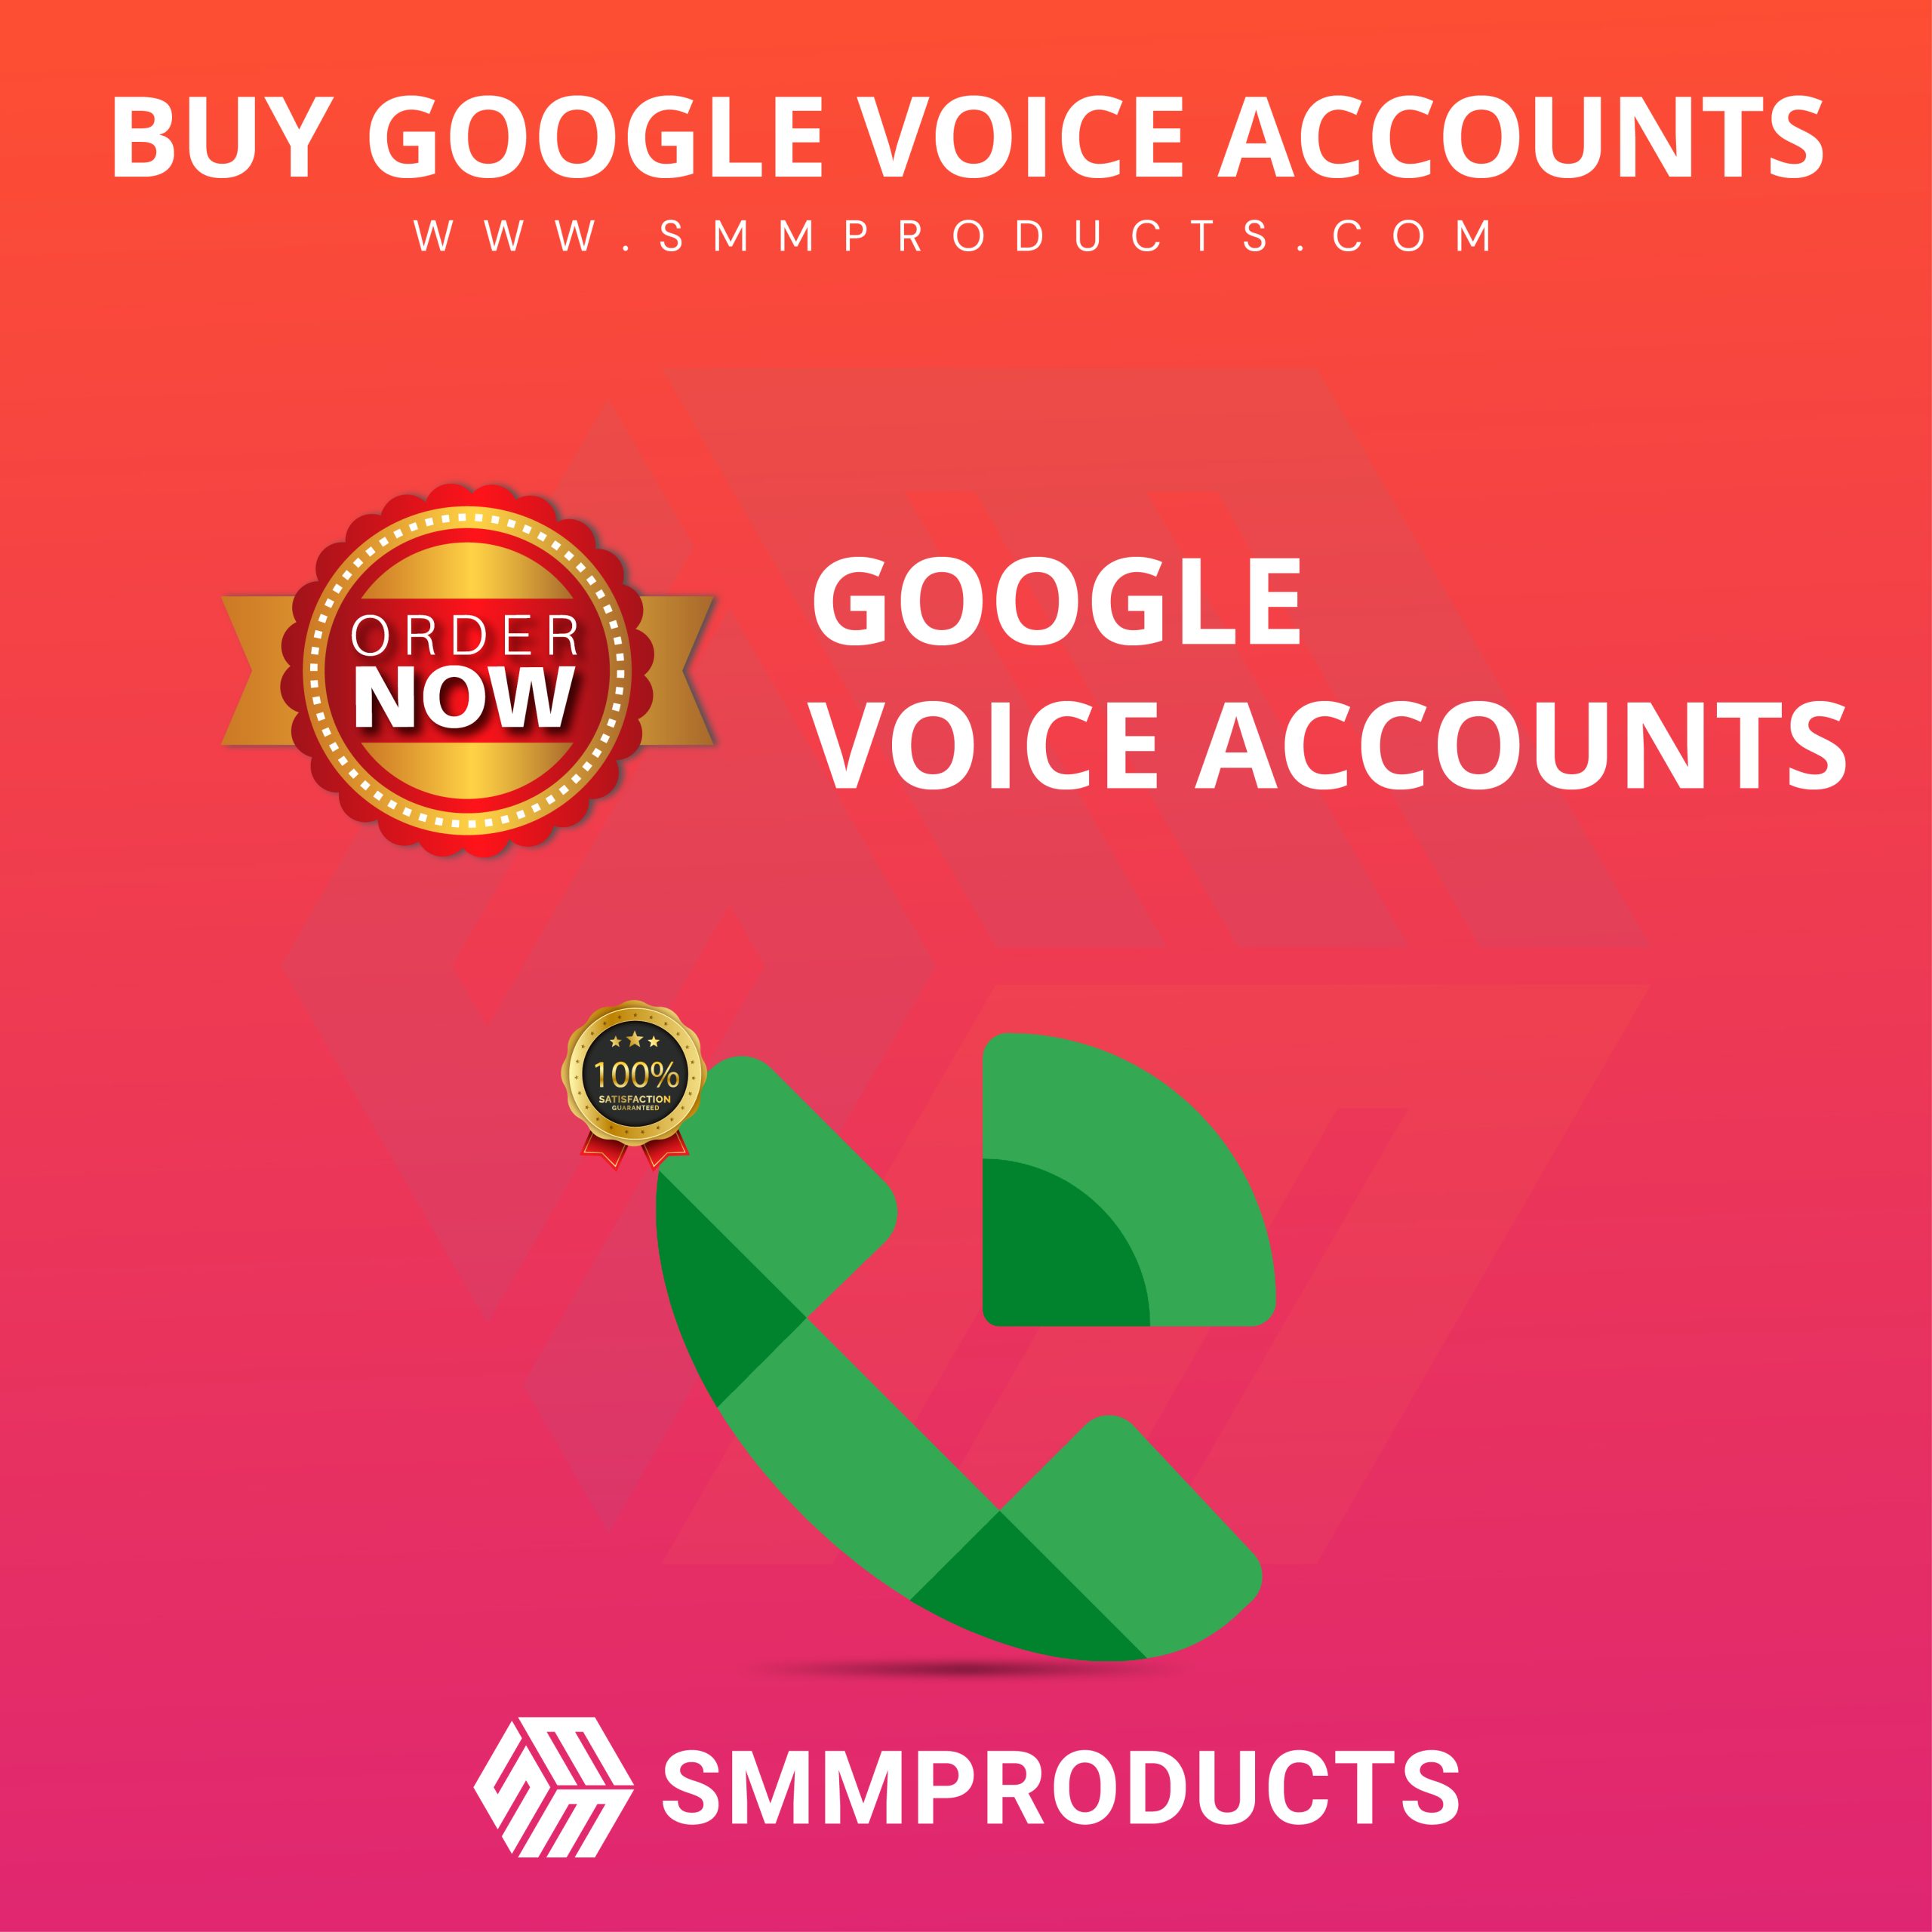 Buy Google Voice Accounts - SMMProducts